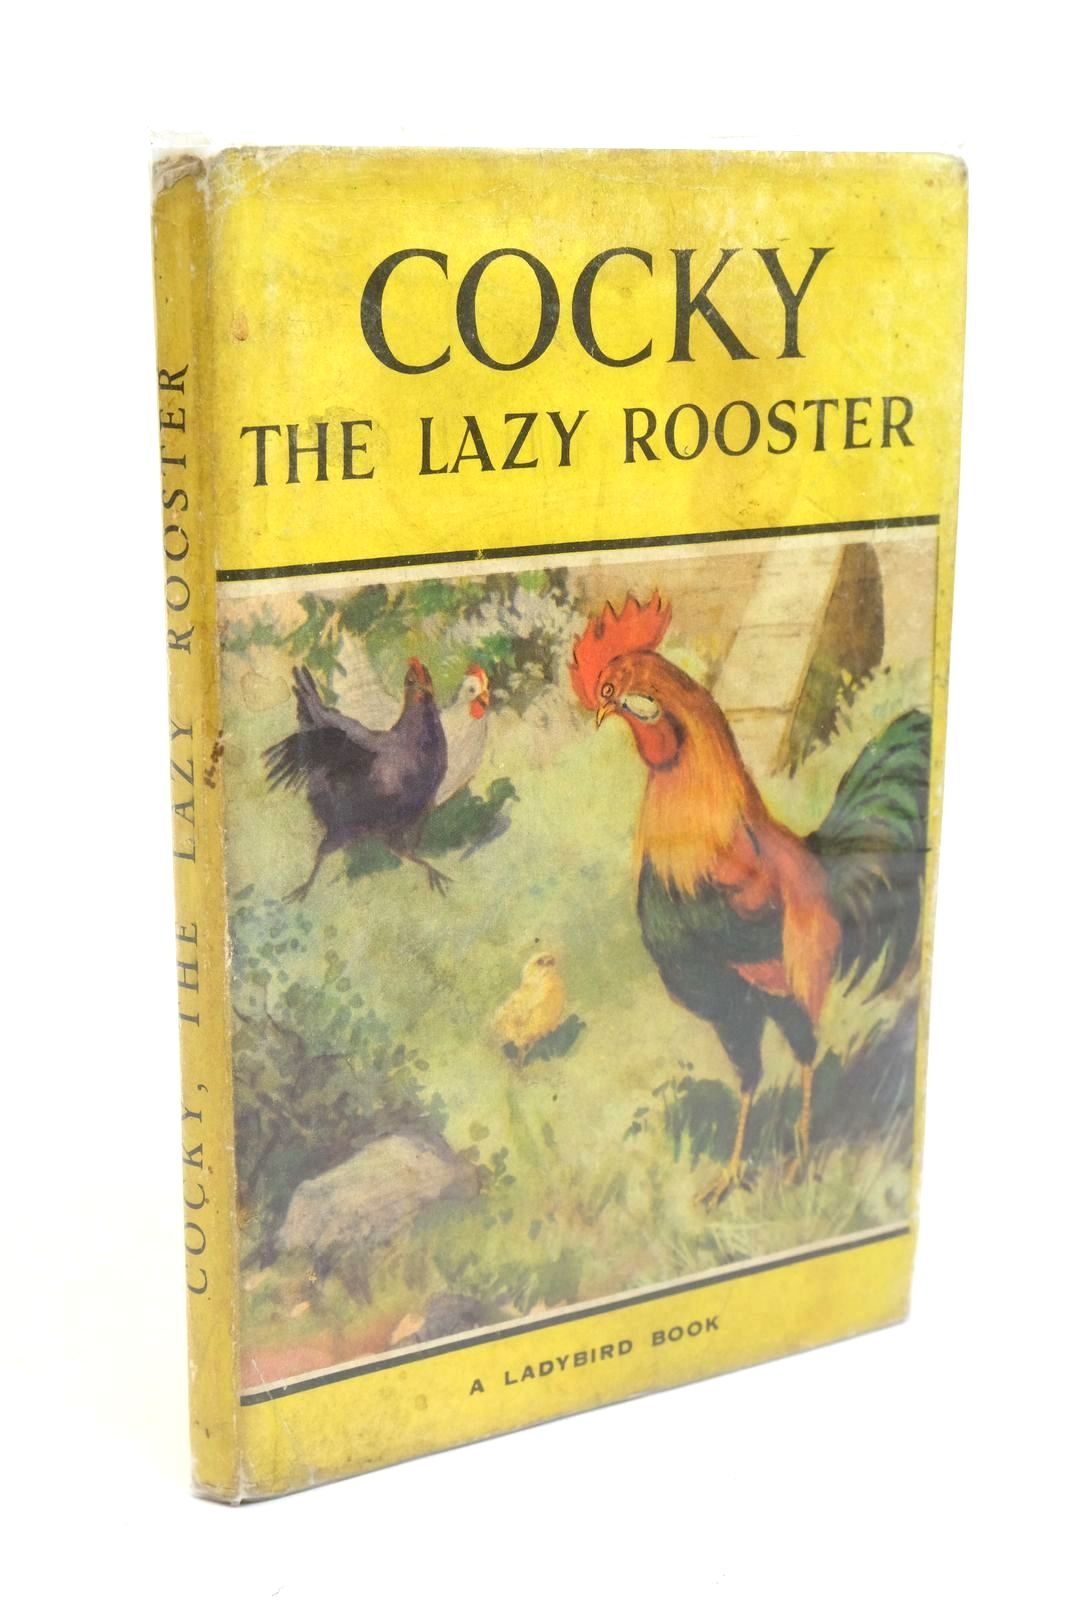 Photo of COCKY THE LAZY ROOSTER written by Barr, Noel illustrated by Hickling, P.B. published by Wills & Hepworth Ltd. (STOCK CODE: 1322395)  for sale by Stella & Rose's Books